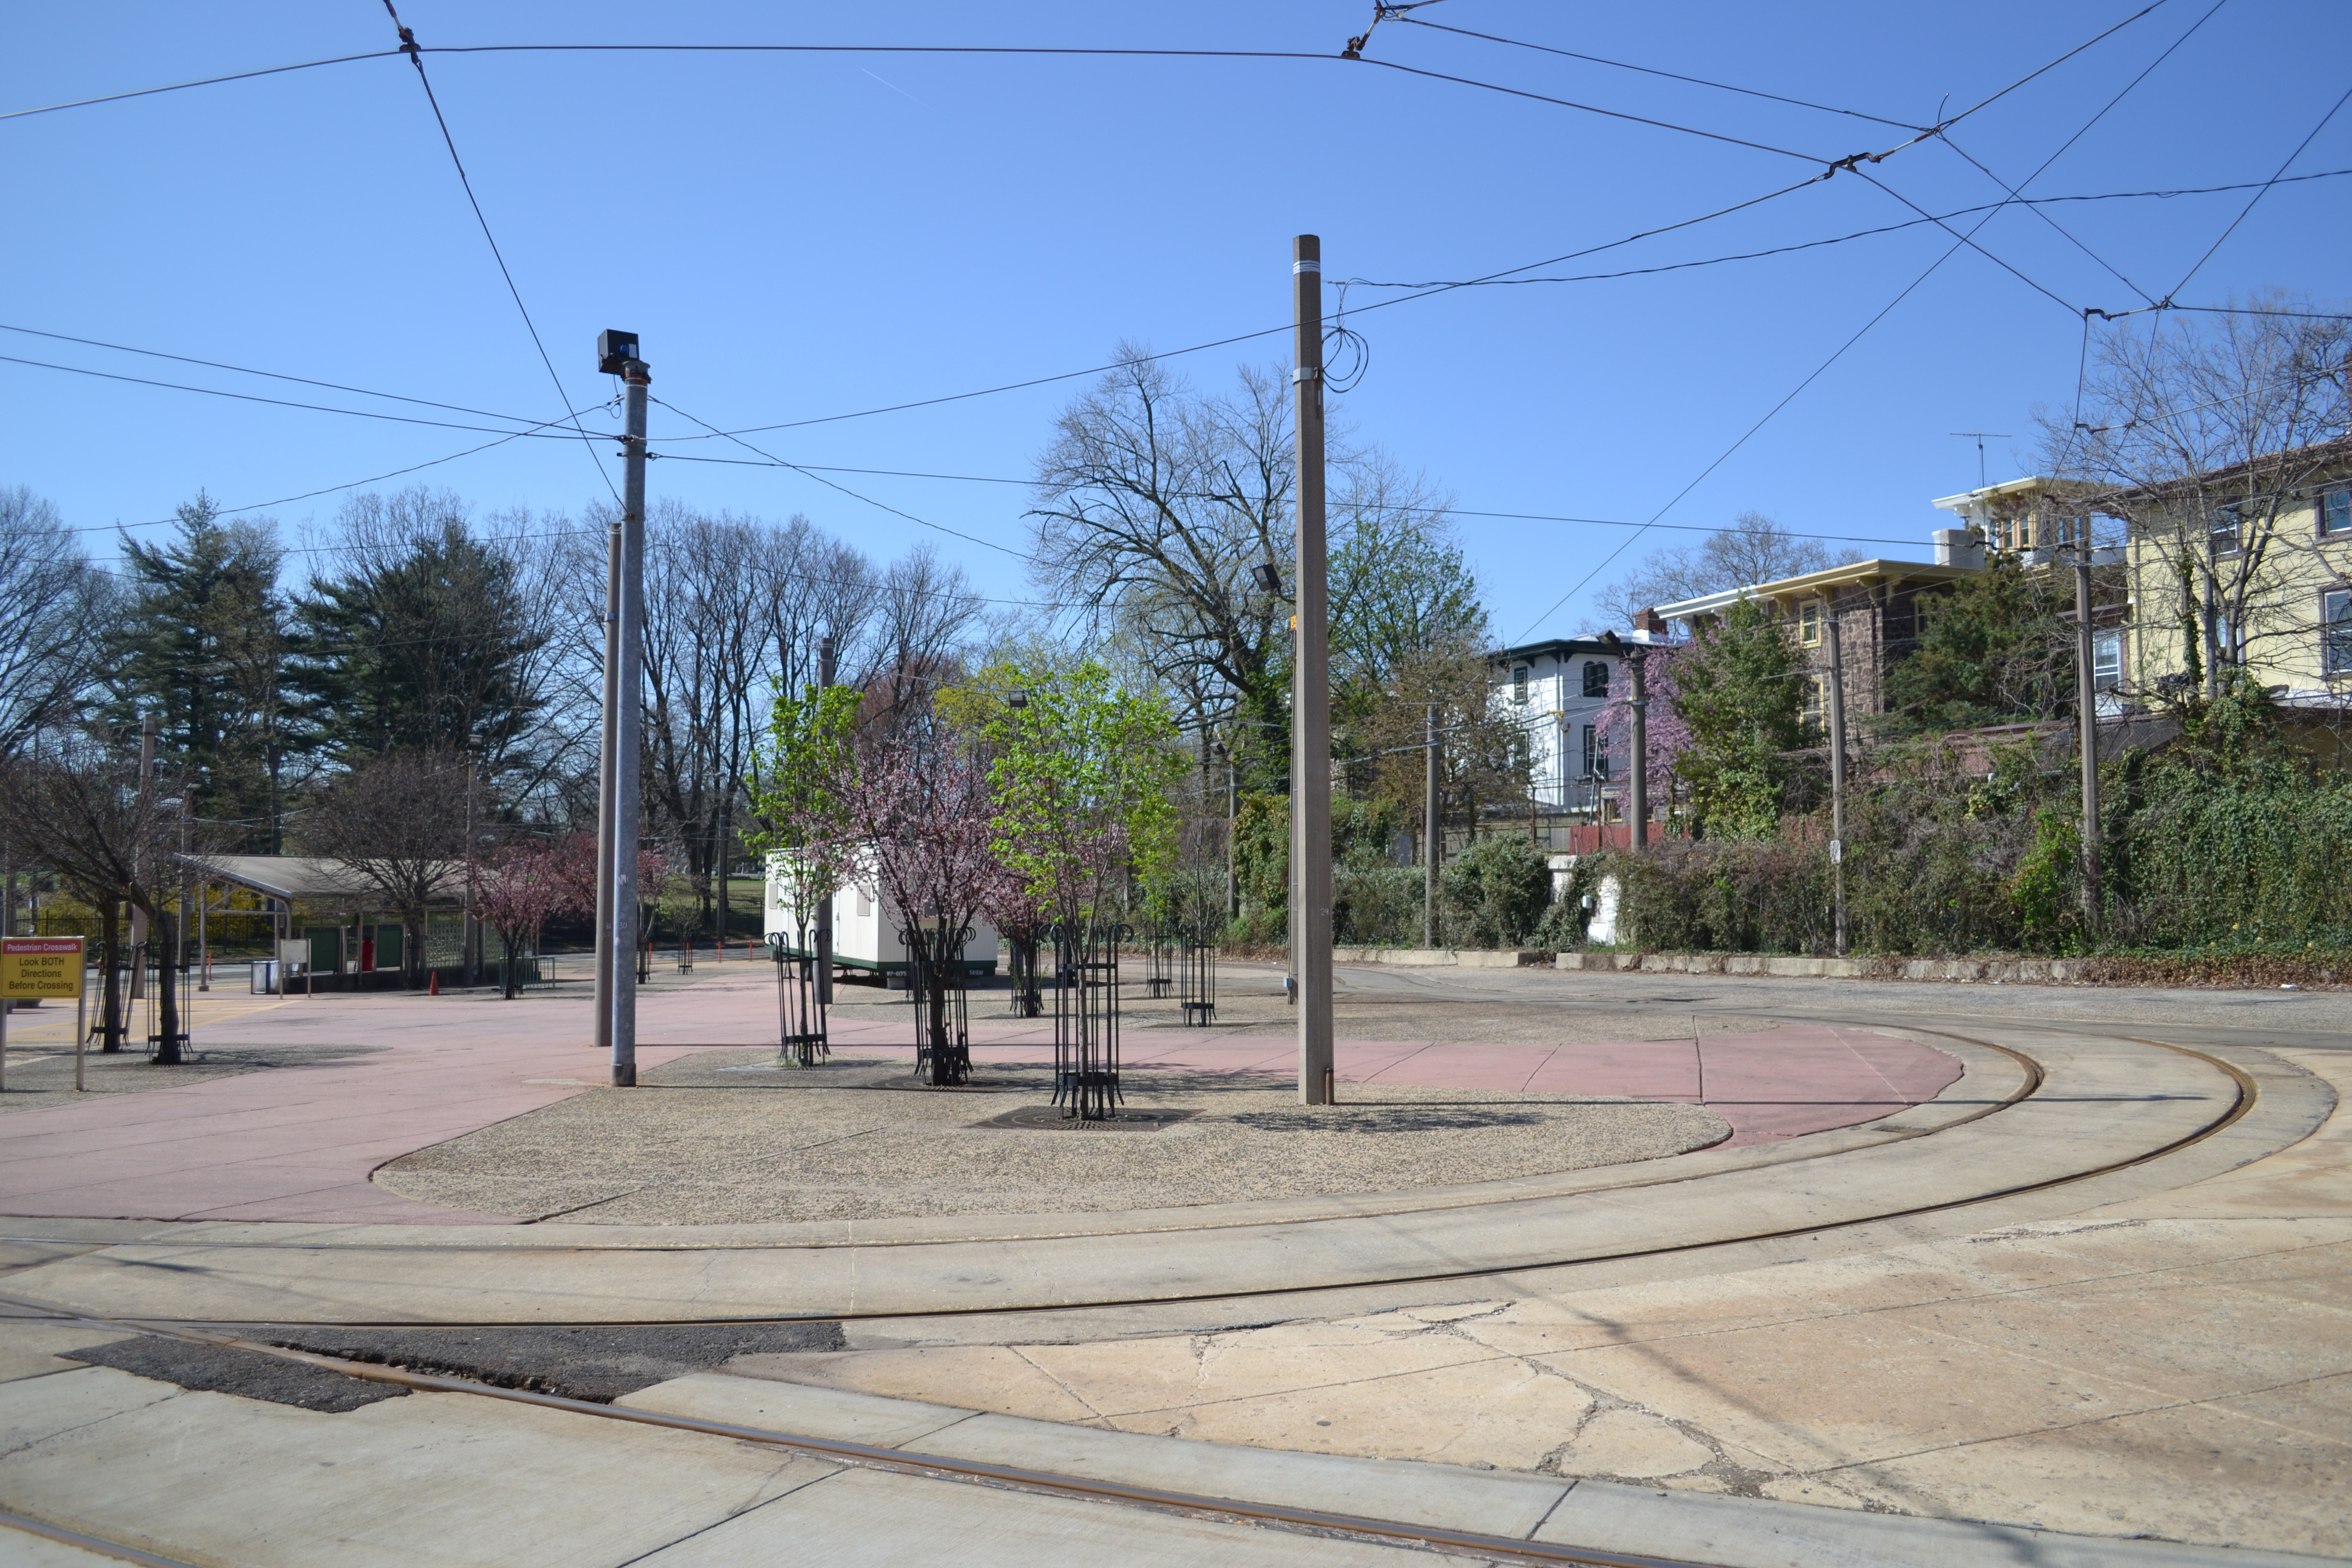 The four trolley routes curve through the space and it can be unclear where pedestrians should walk